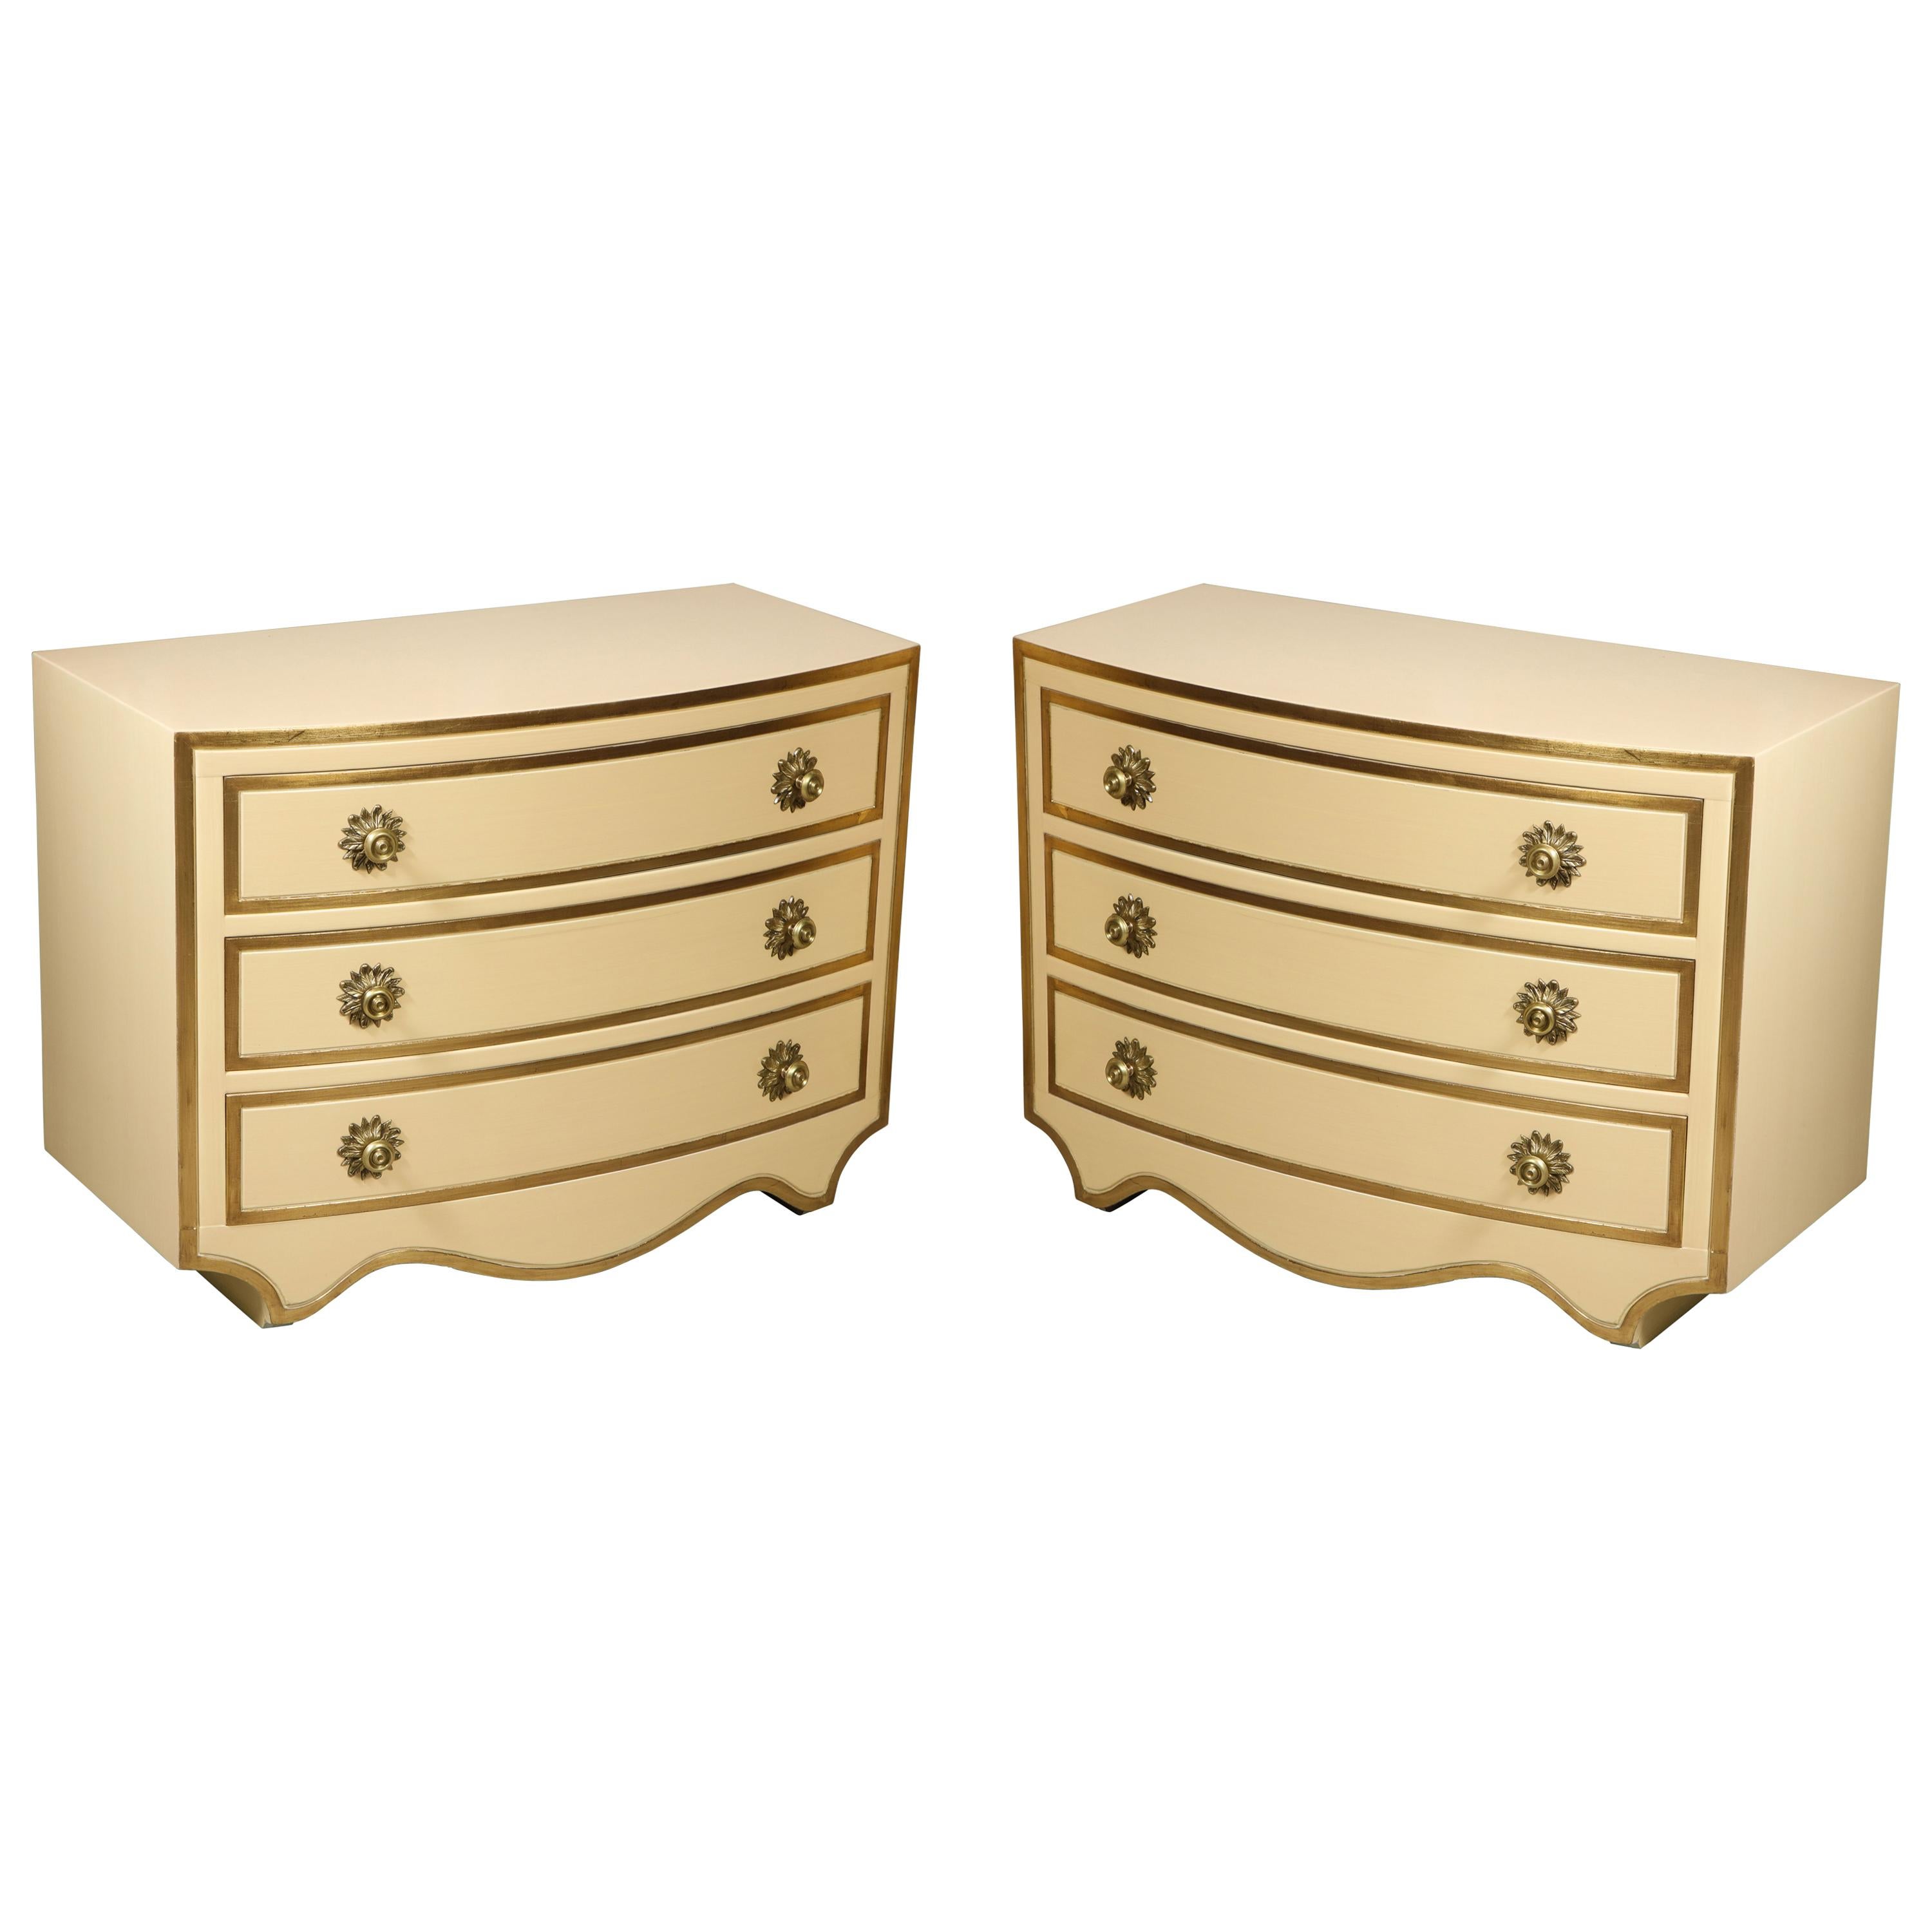 Painted and parcel gilt 3 drawer chests with brass handles by Dorothy Draper